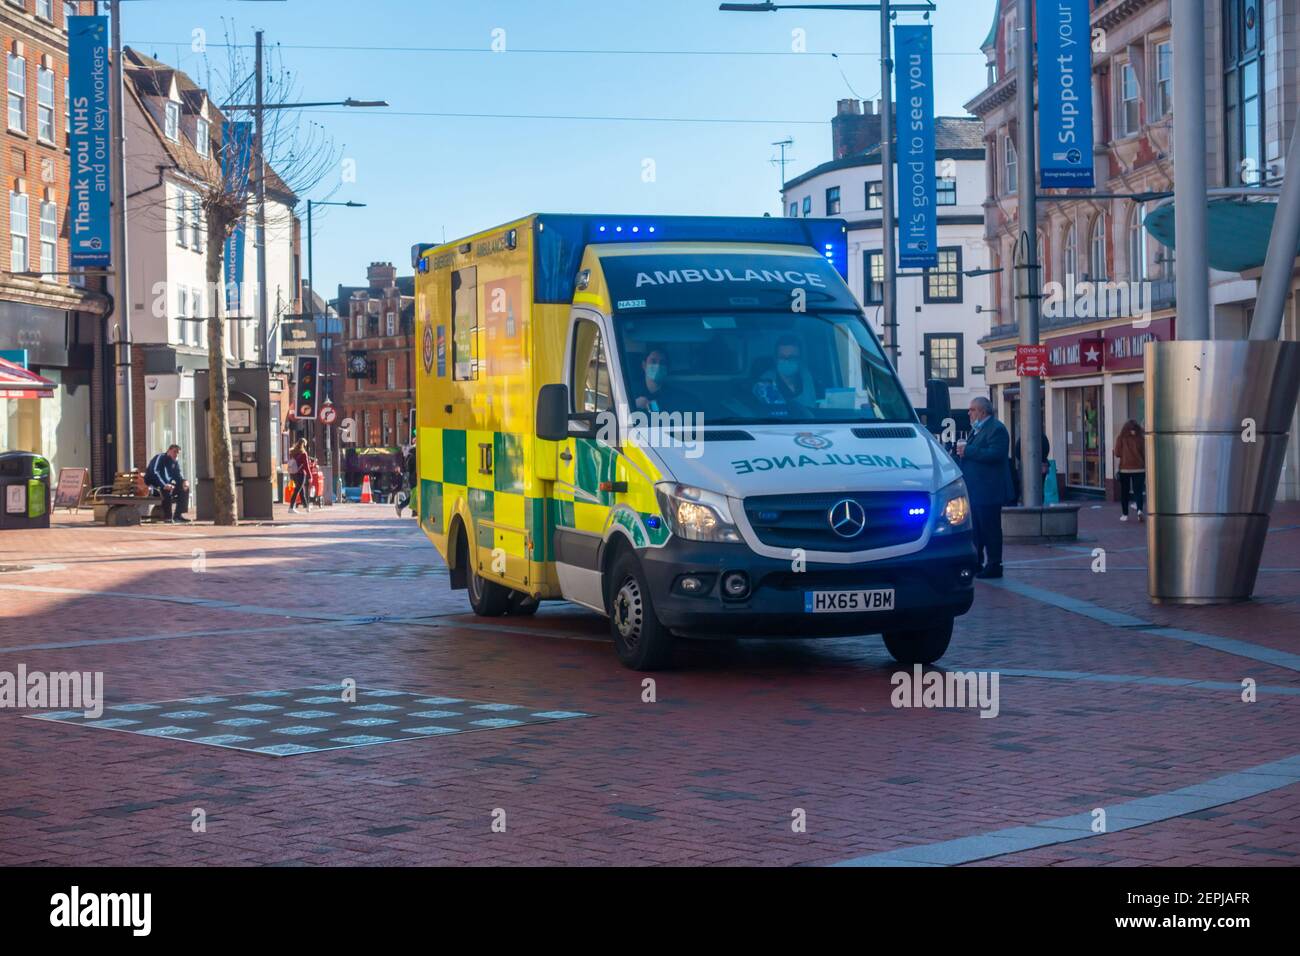 An ambulance with flashing blue lights makes it way carefully along Broadstreet in Reading, UK, a pedestrianised street in the town centre. Stock Photo